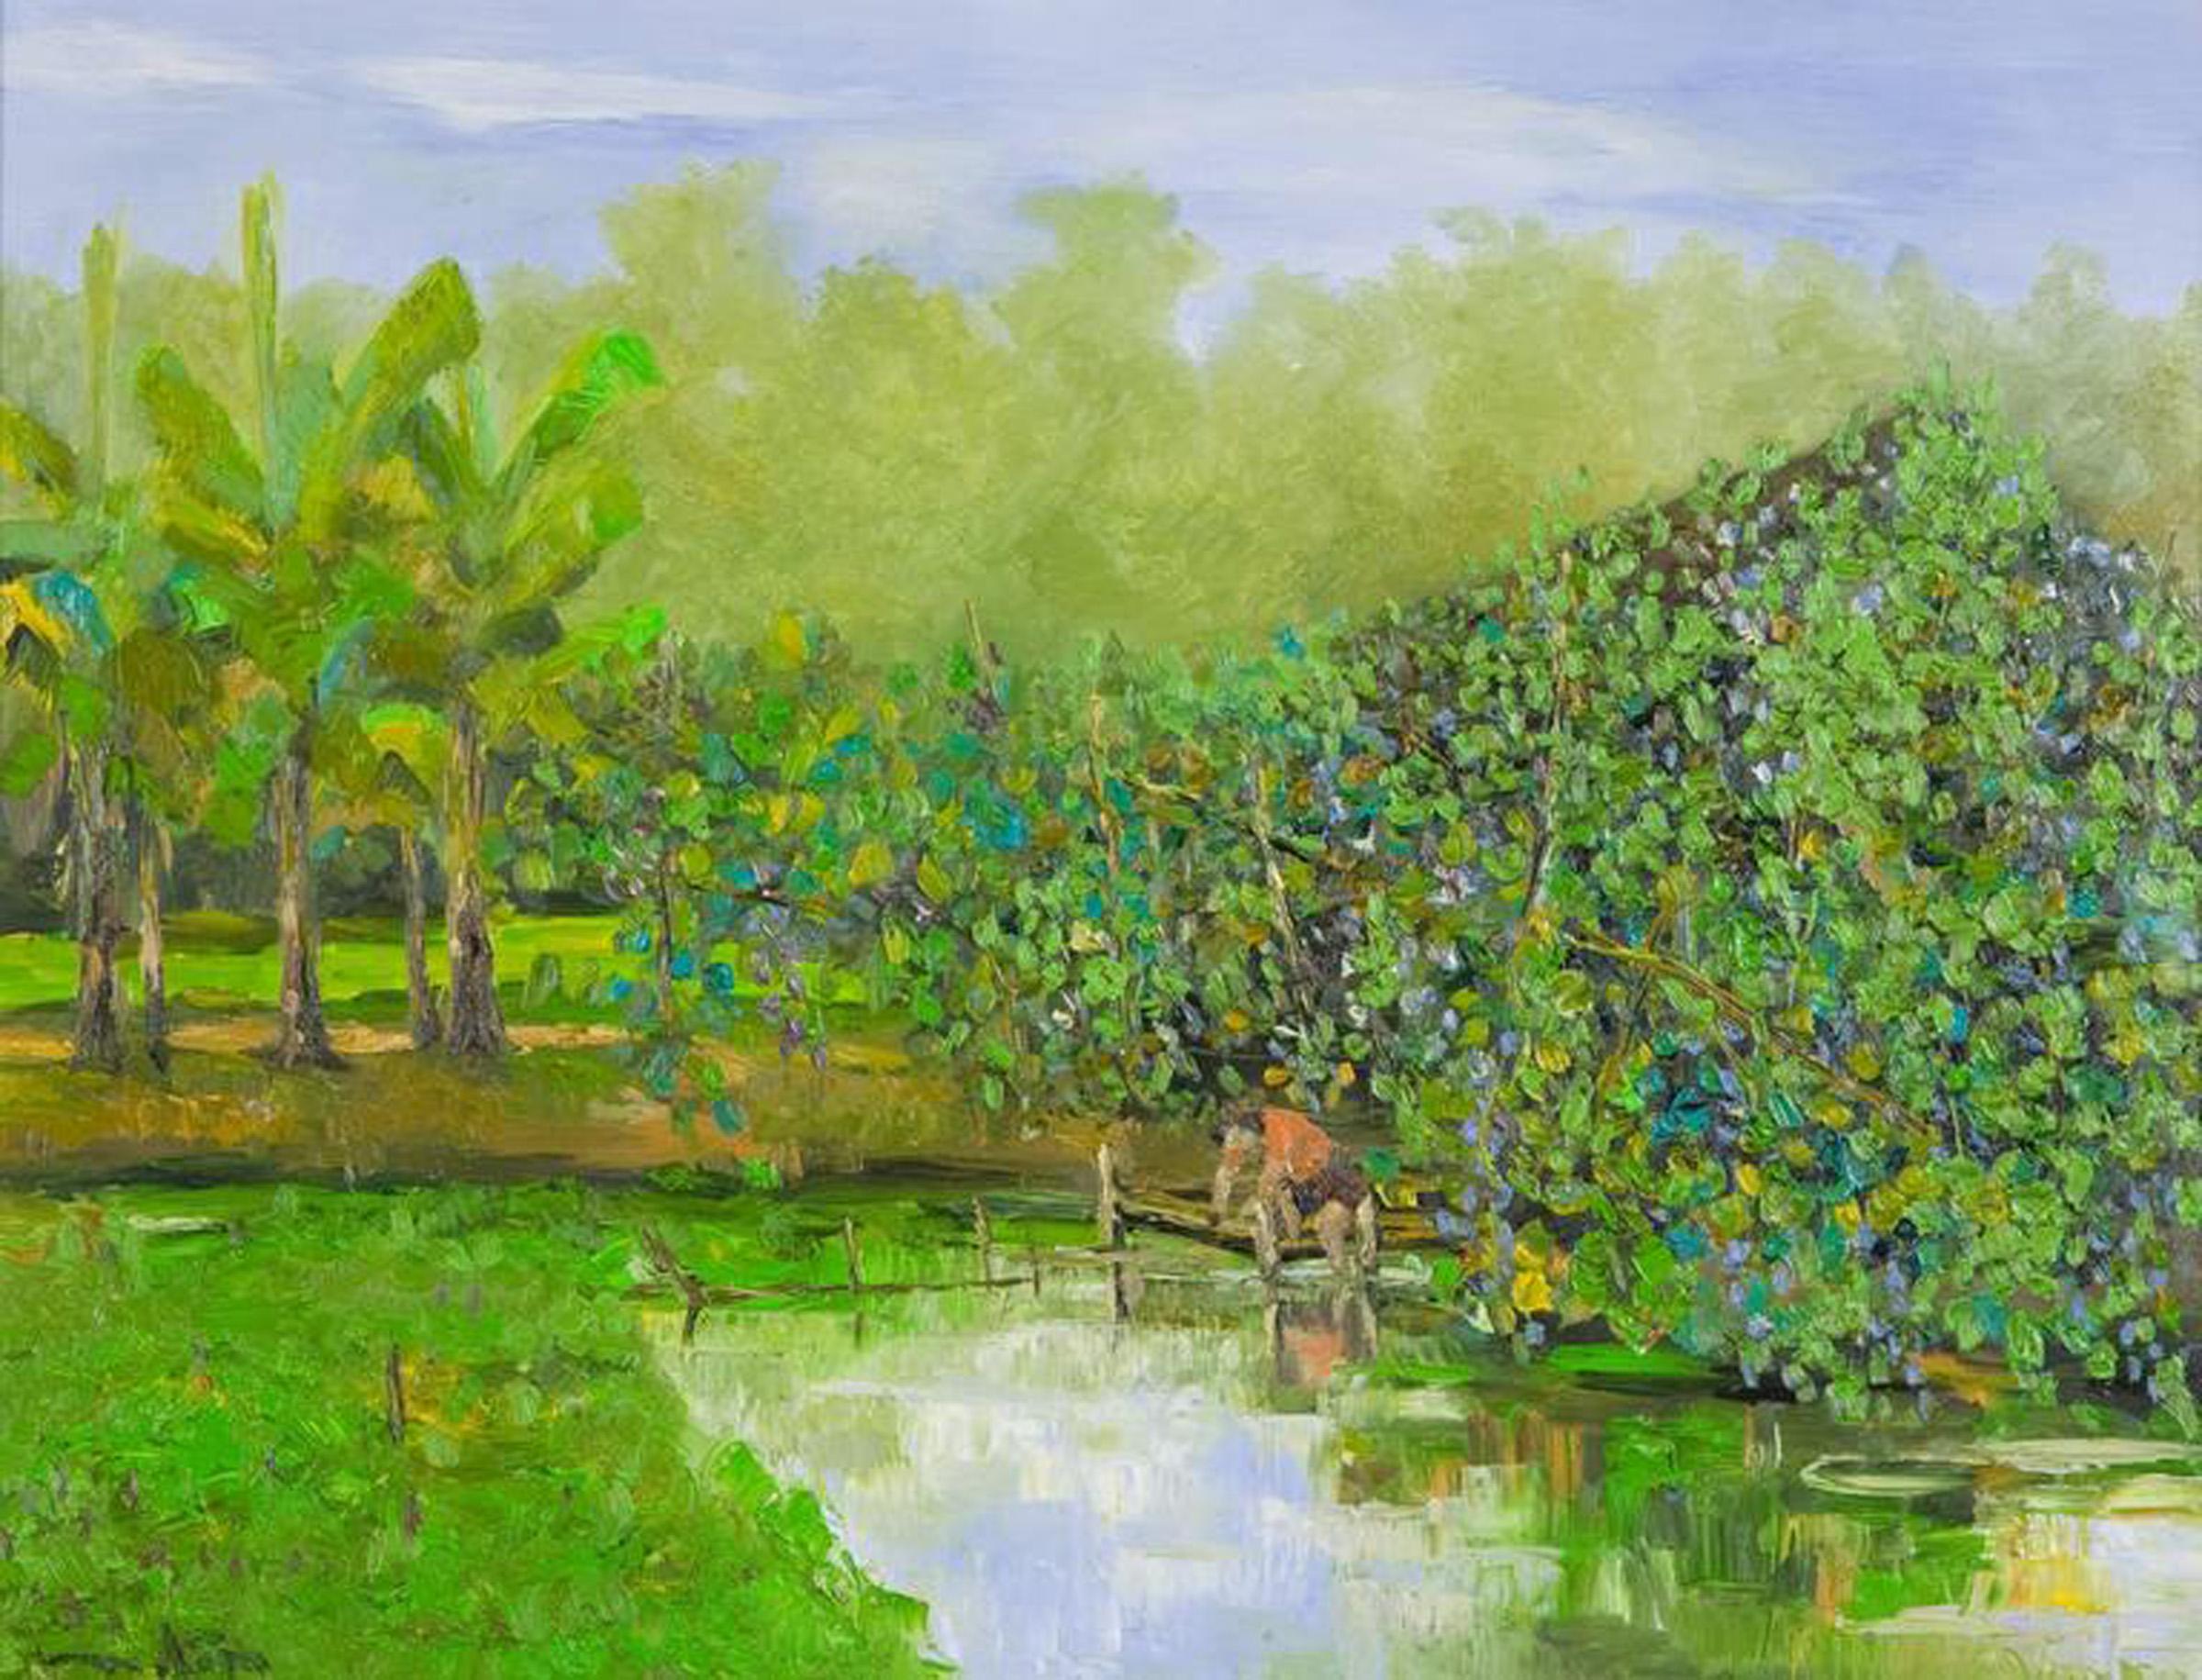 ‘Water Fern Pond’ is a medium size contemporary oil on canvas landscape painting created by Vietnamese artist Ngo Duc Lam in 2009. Featuring an exquisite palette made of green and blue colors accentuated with discreet orange touches, the painting